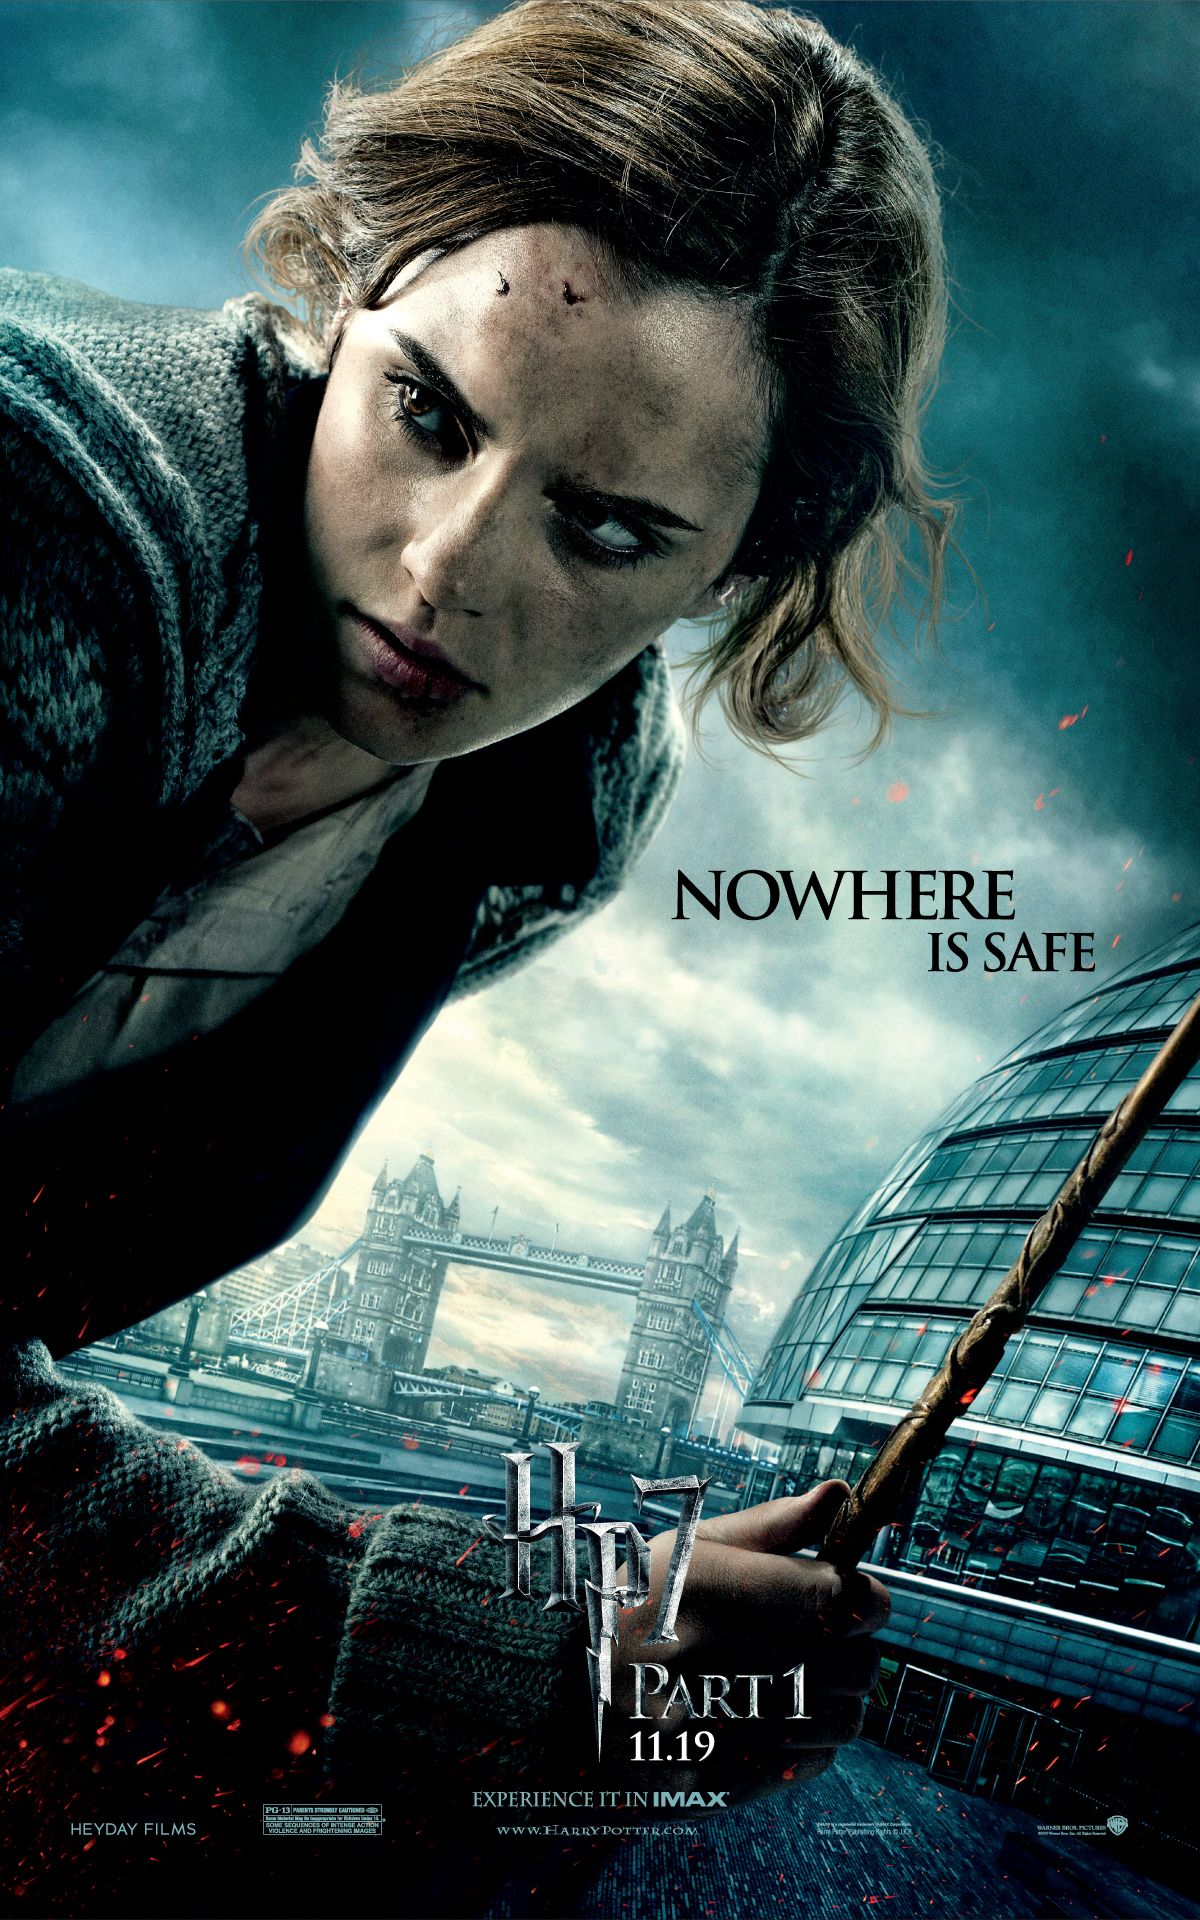 Harry Potter and the Deathly Hallows Character Poster #2